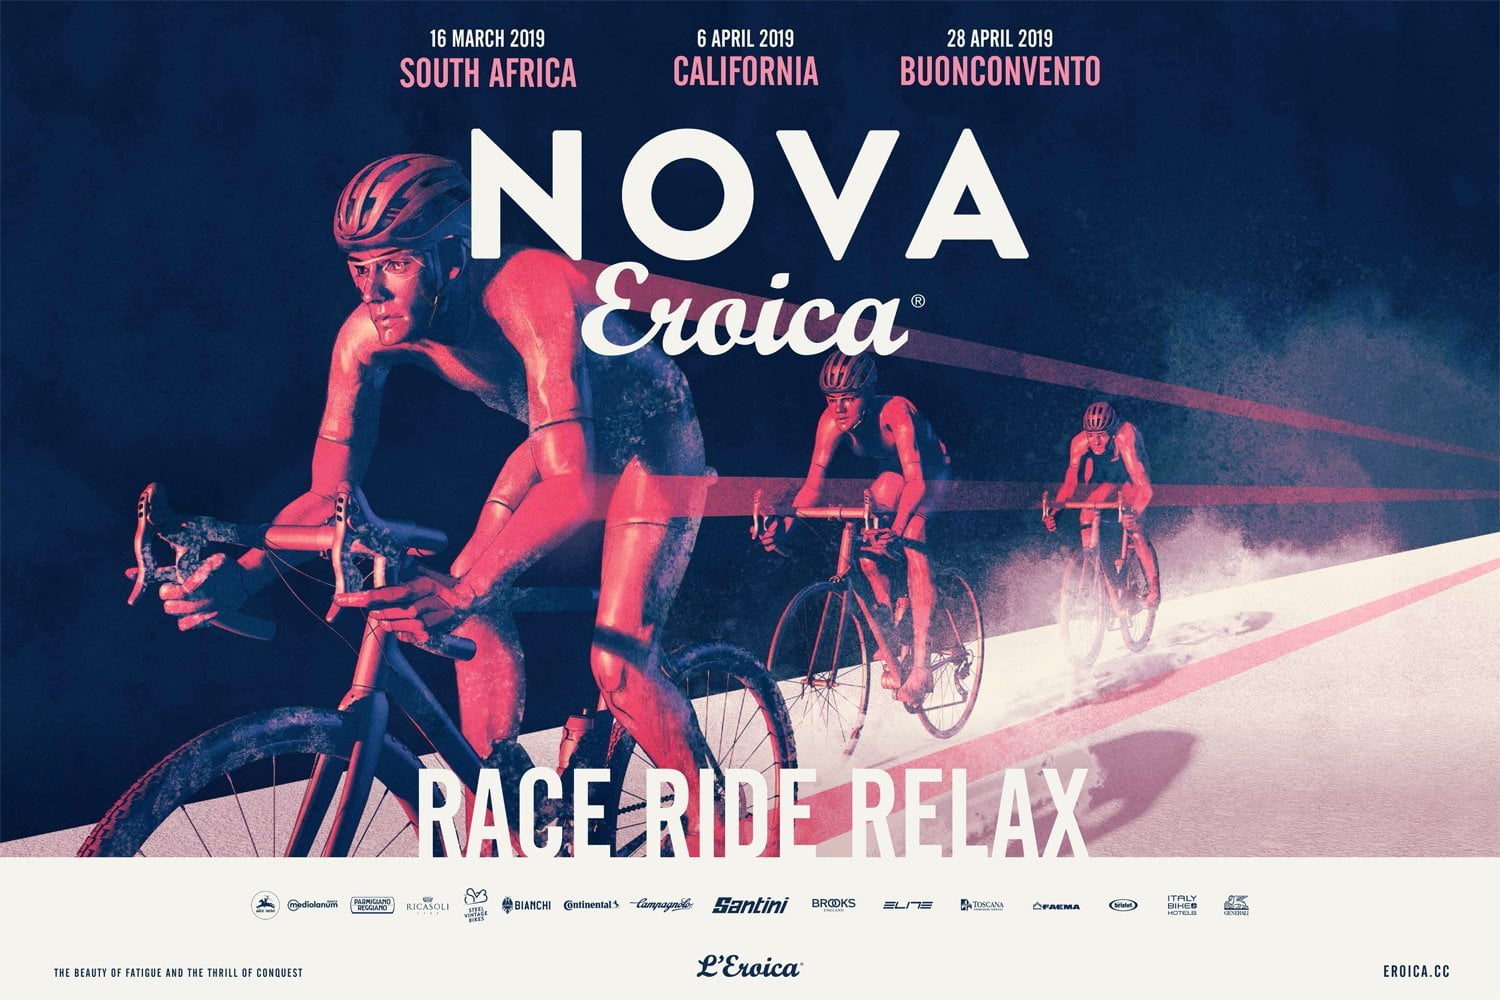 Bianchi News: Gravel party in Tuscany: Bianchi in the spotlights at Nova Eroica